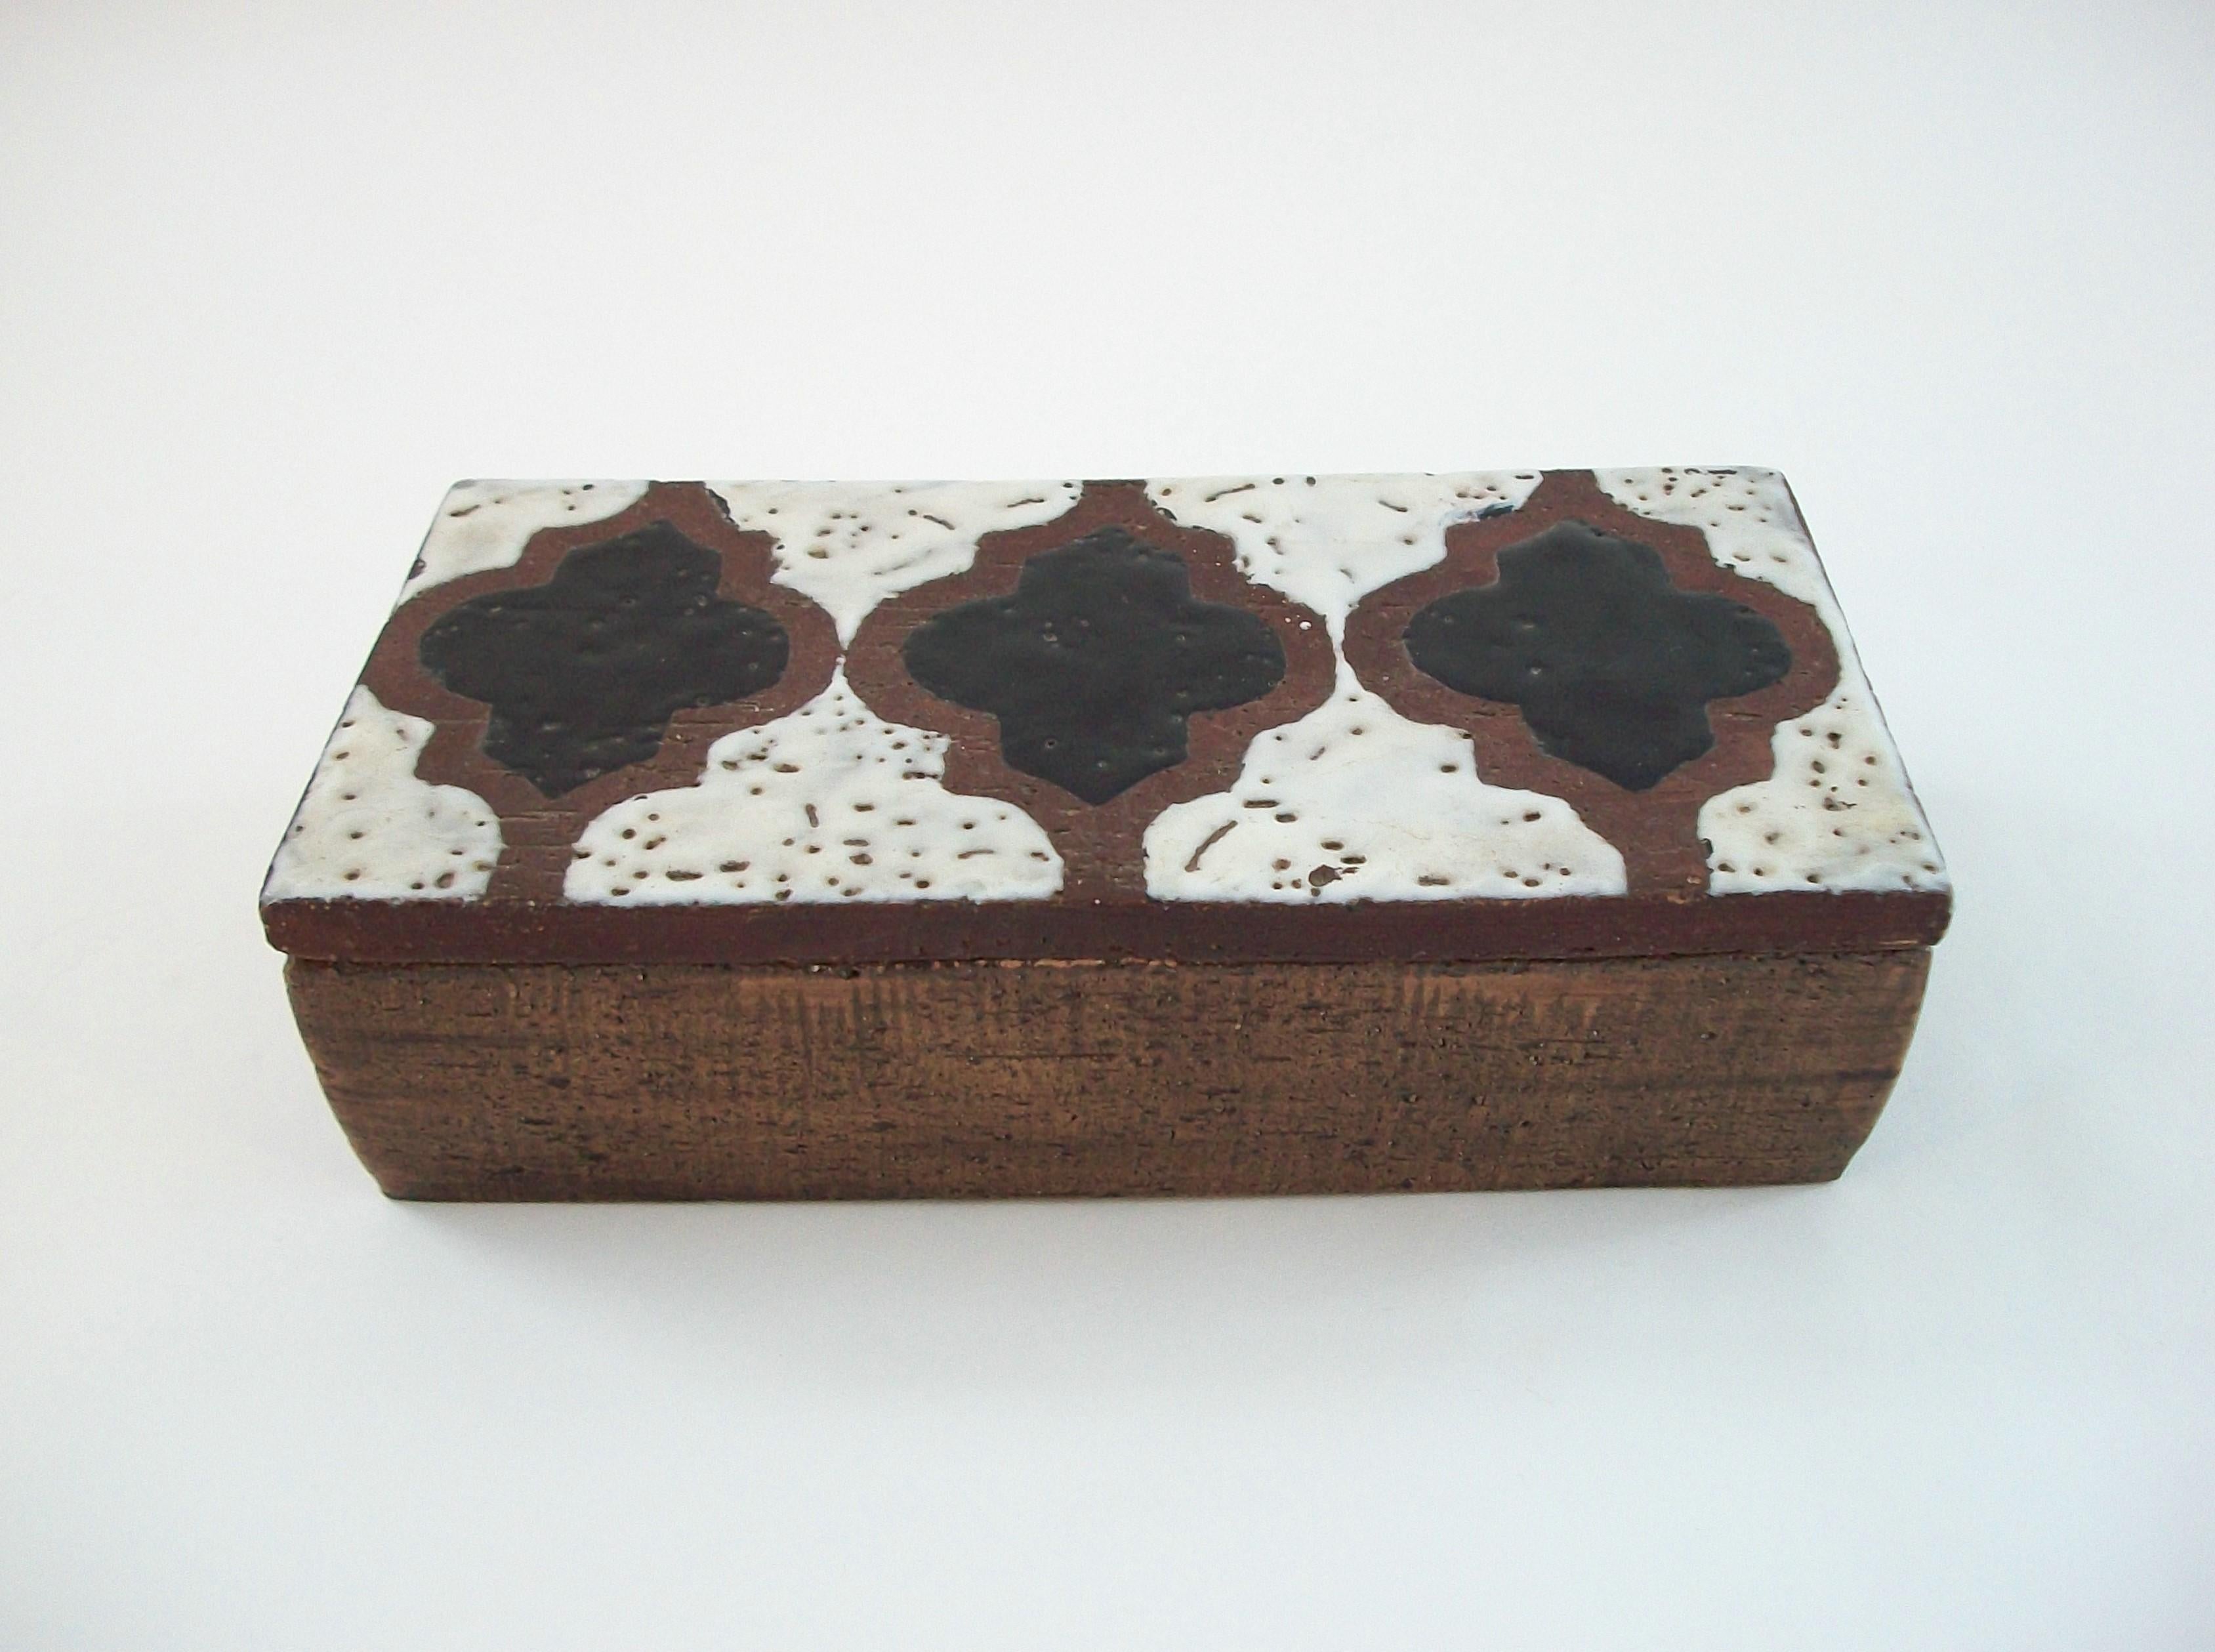 BITOSSI (Manufacturer) - ALDO LONDI (Designer) - PIASTRELLE BICOLORE (Series) - Rare Mid Century studio pottery arabesque pattern lidded box - hand finished - mold formed - featuring a color block palette of matte white, matte brown and gloss black